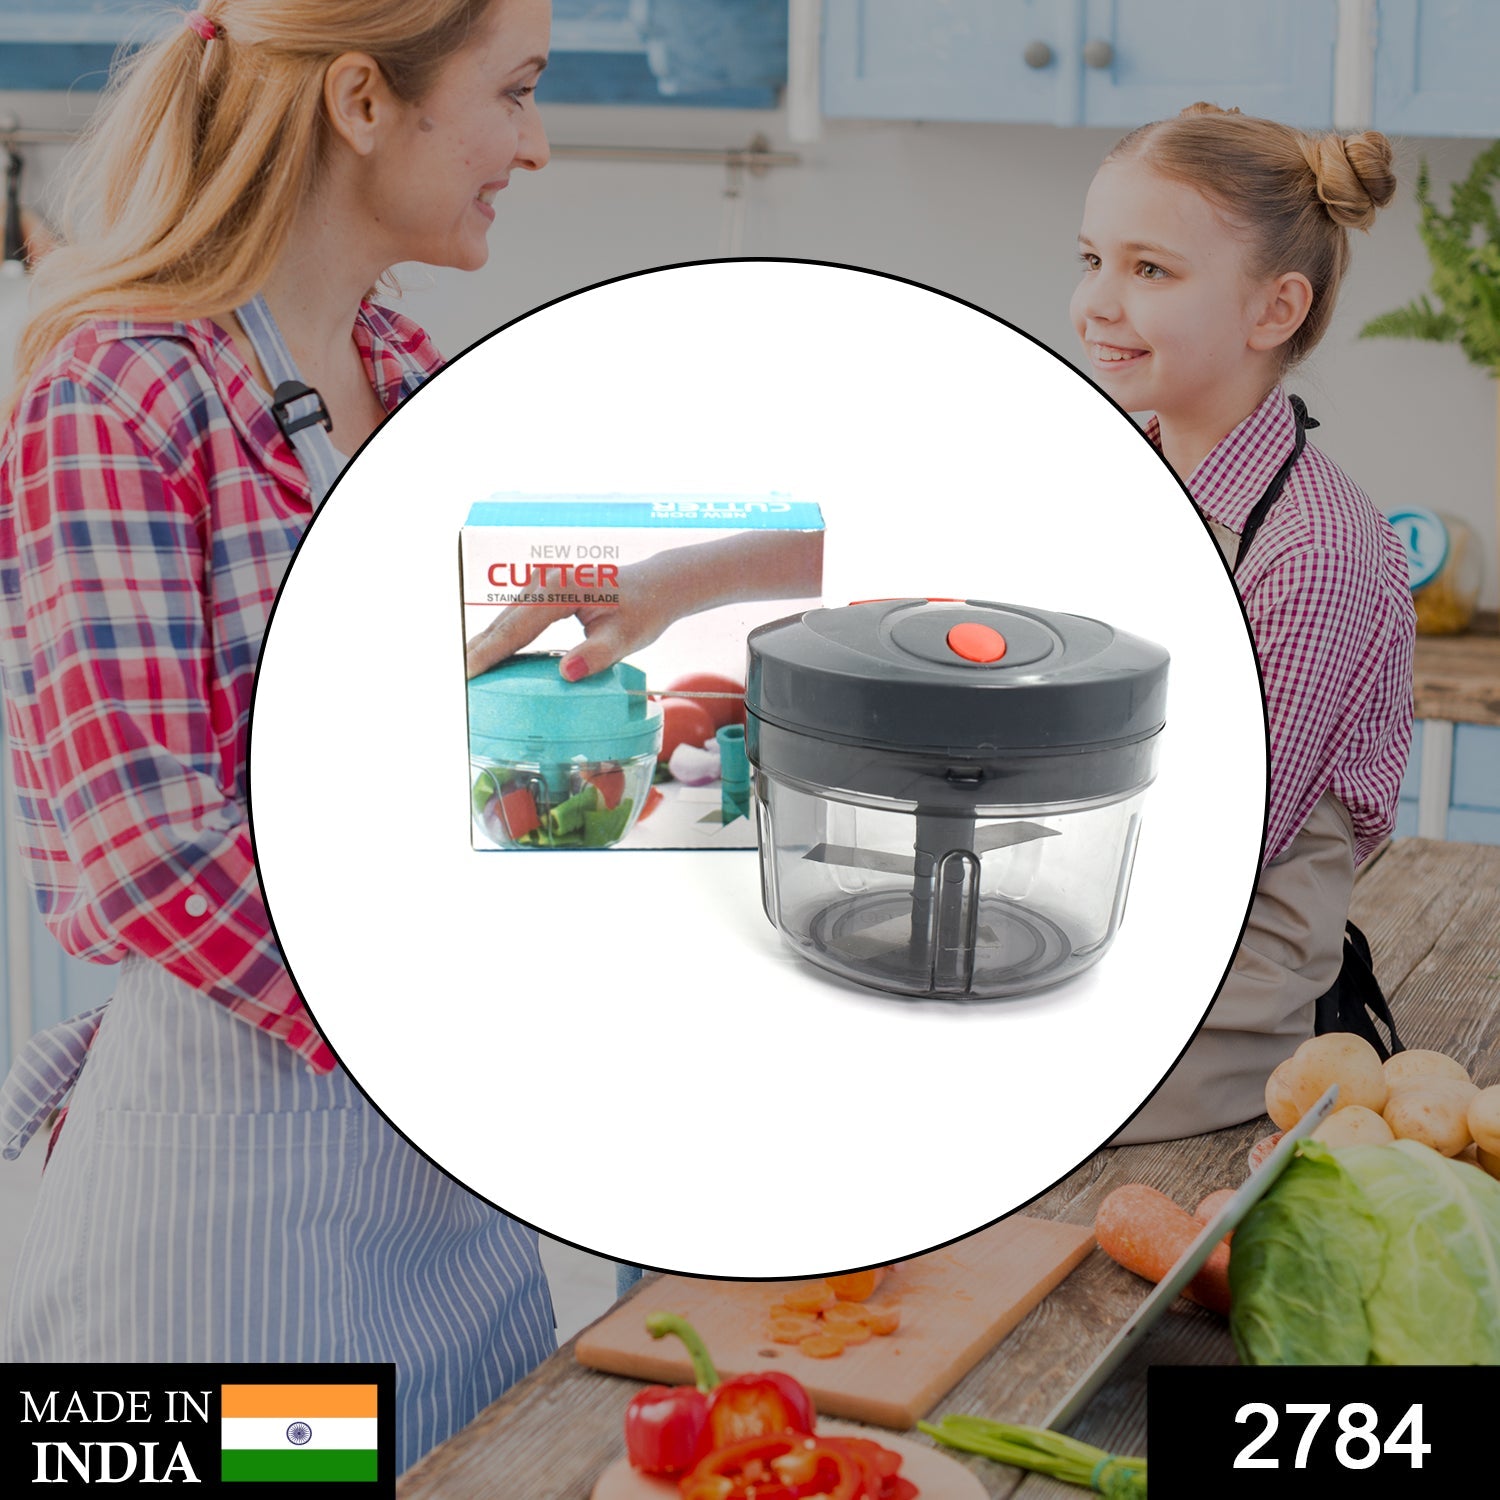 2784 4 Blade Handy Chopper For Chopping And Cutting Of Types Of Fruits And Vegetables Easily. 